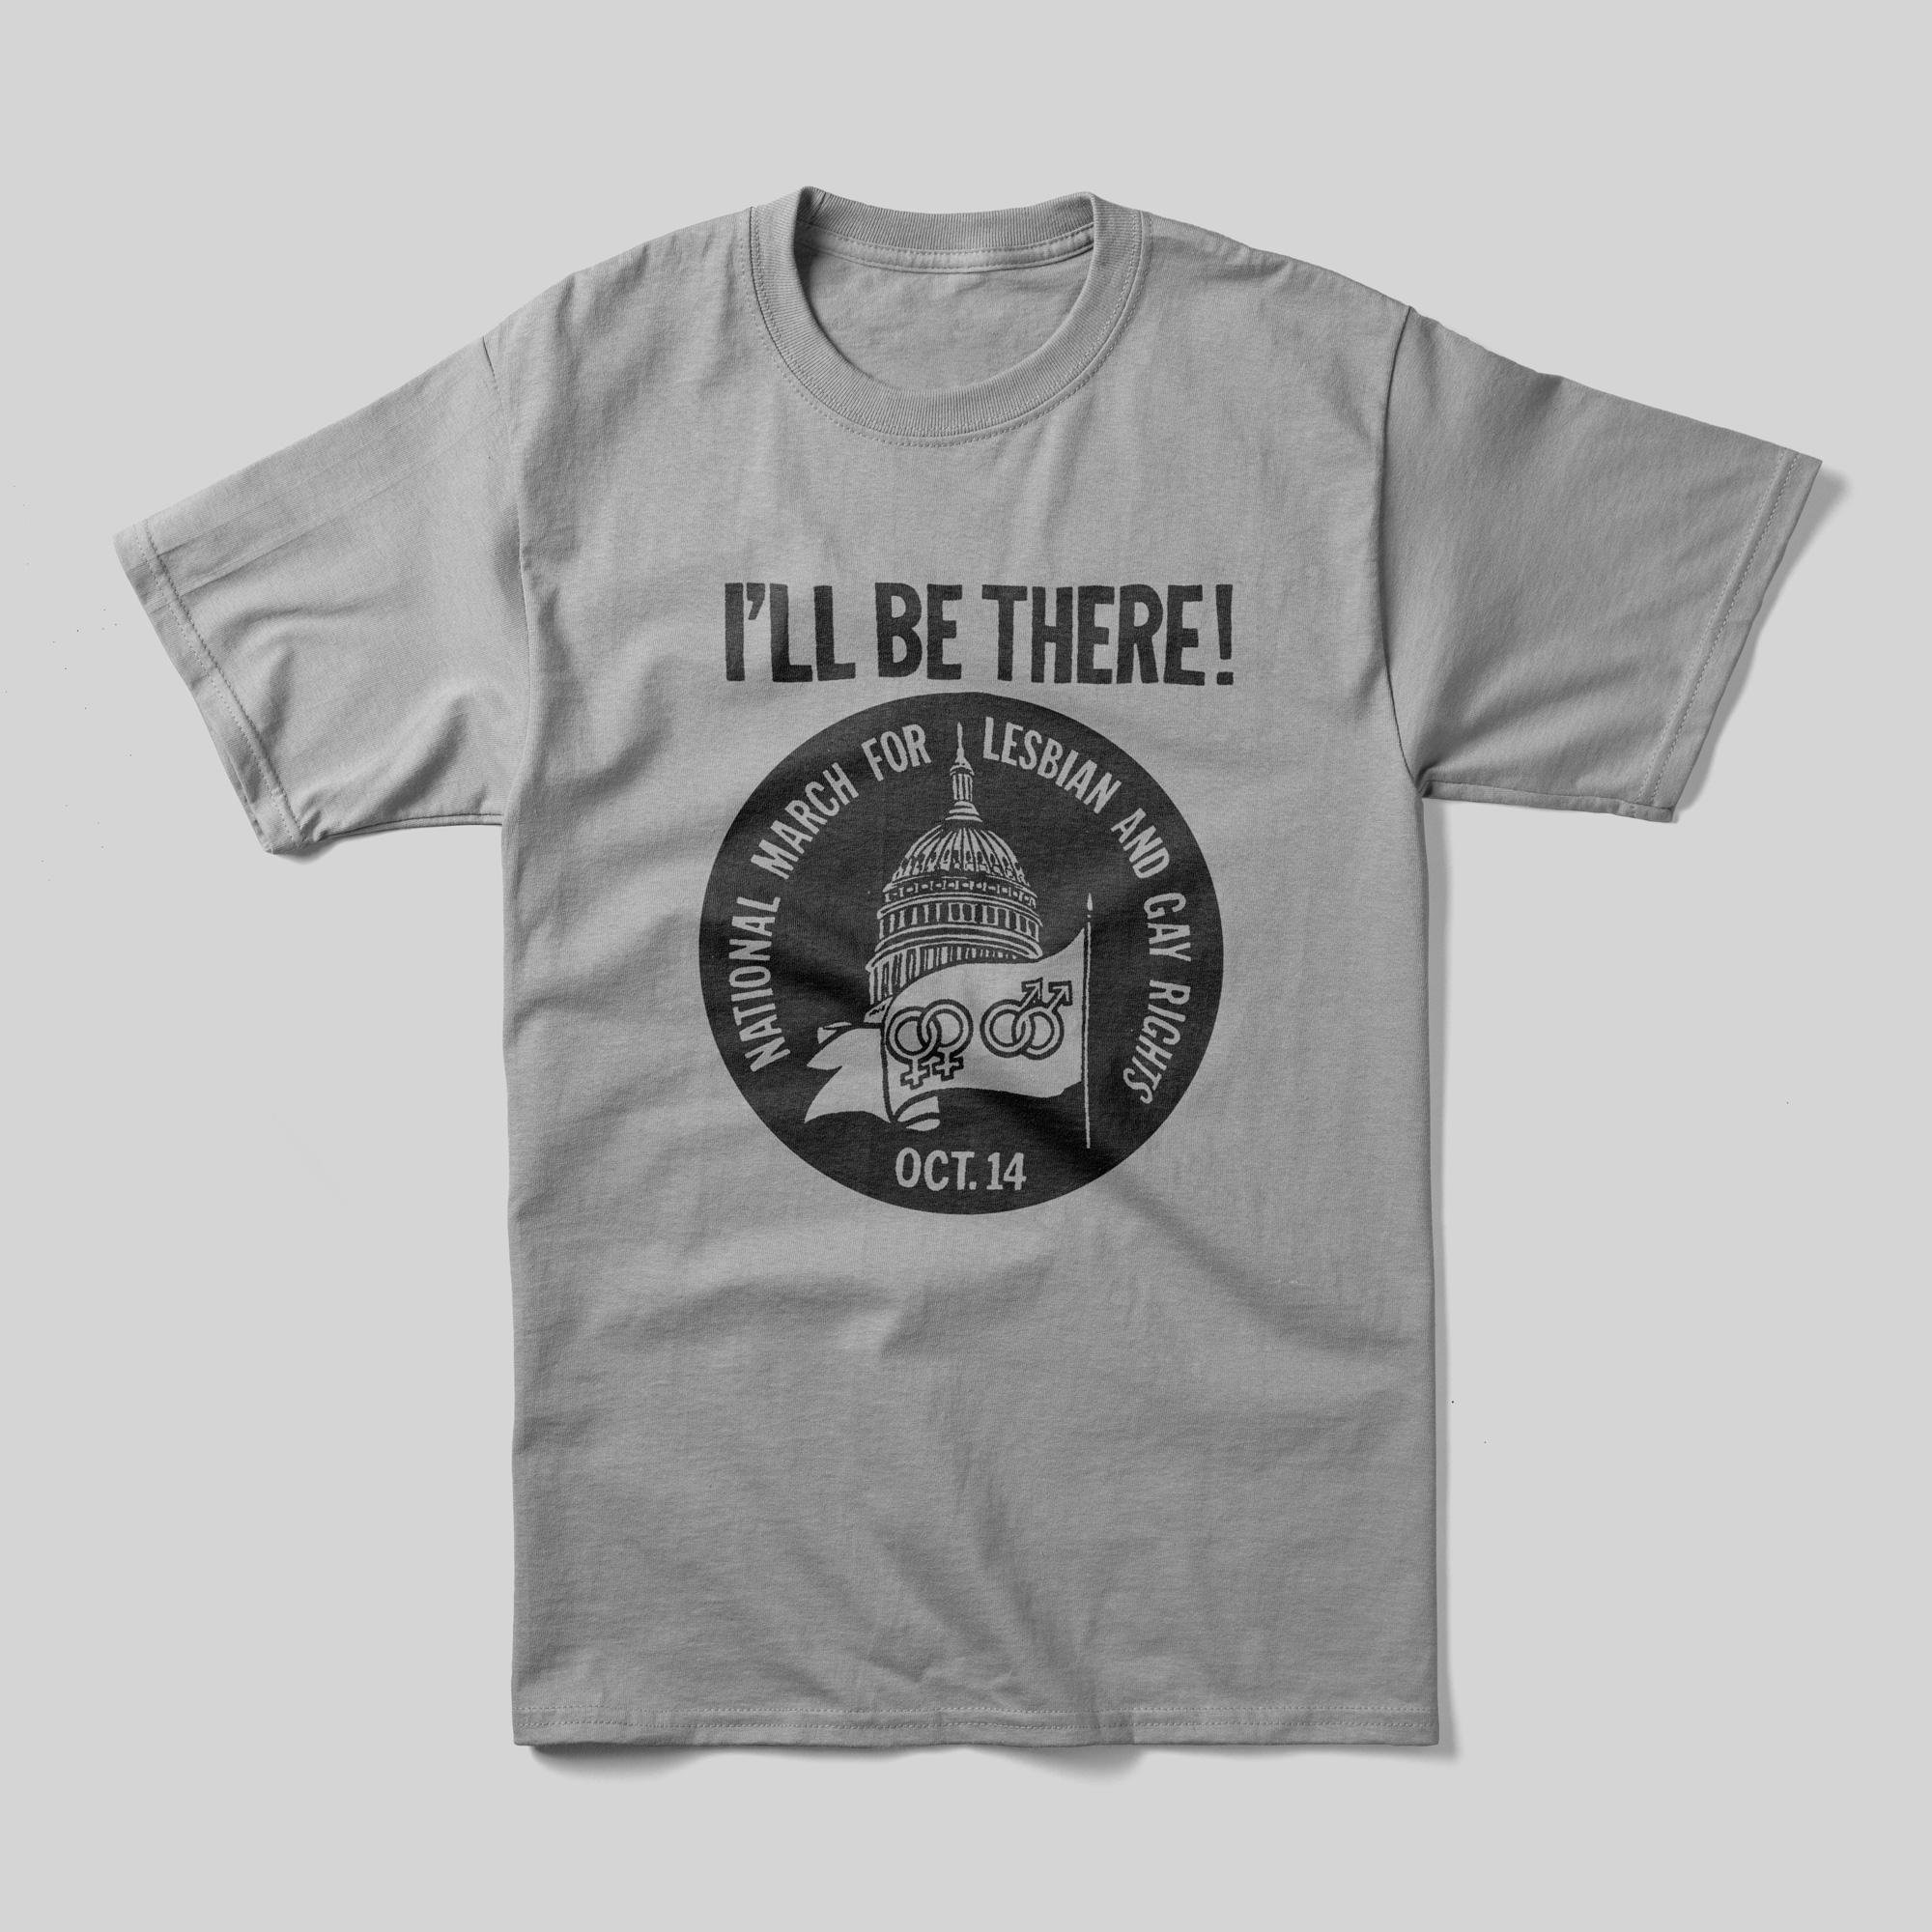 A gray t-shirt that reads, "I'll be there!" above the emblem for the National March for Lesbian and Gay Rights.